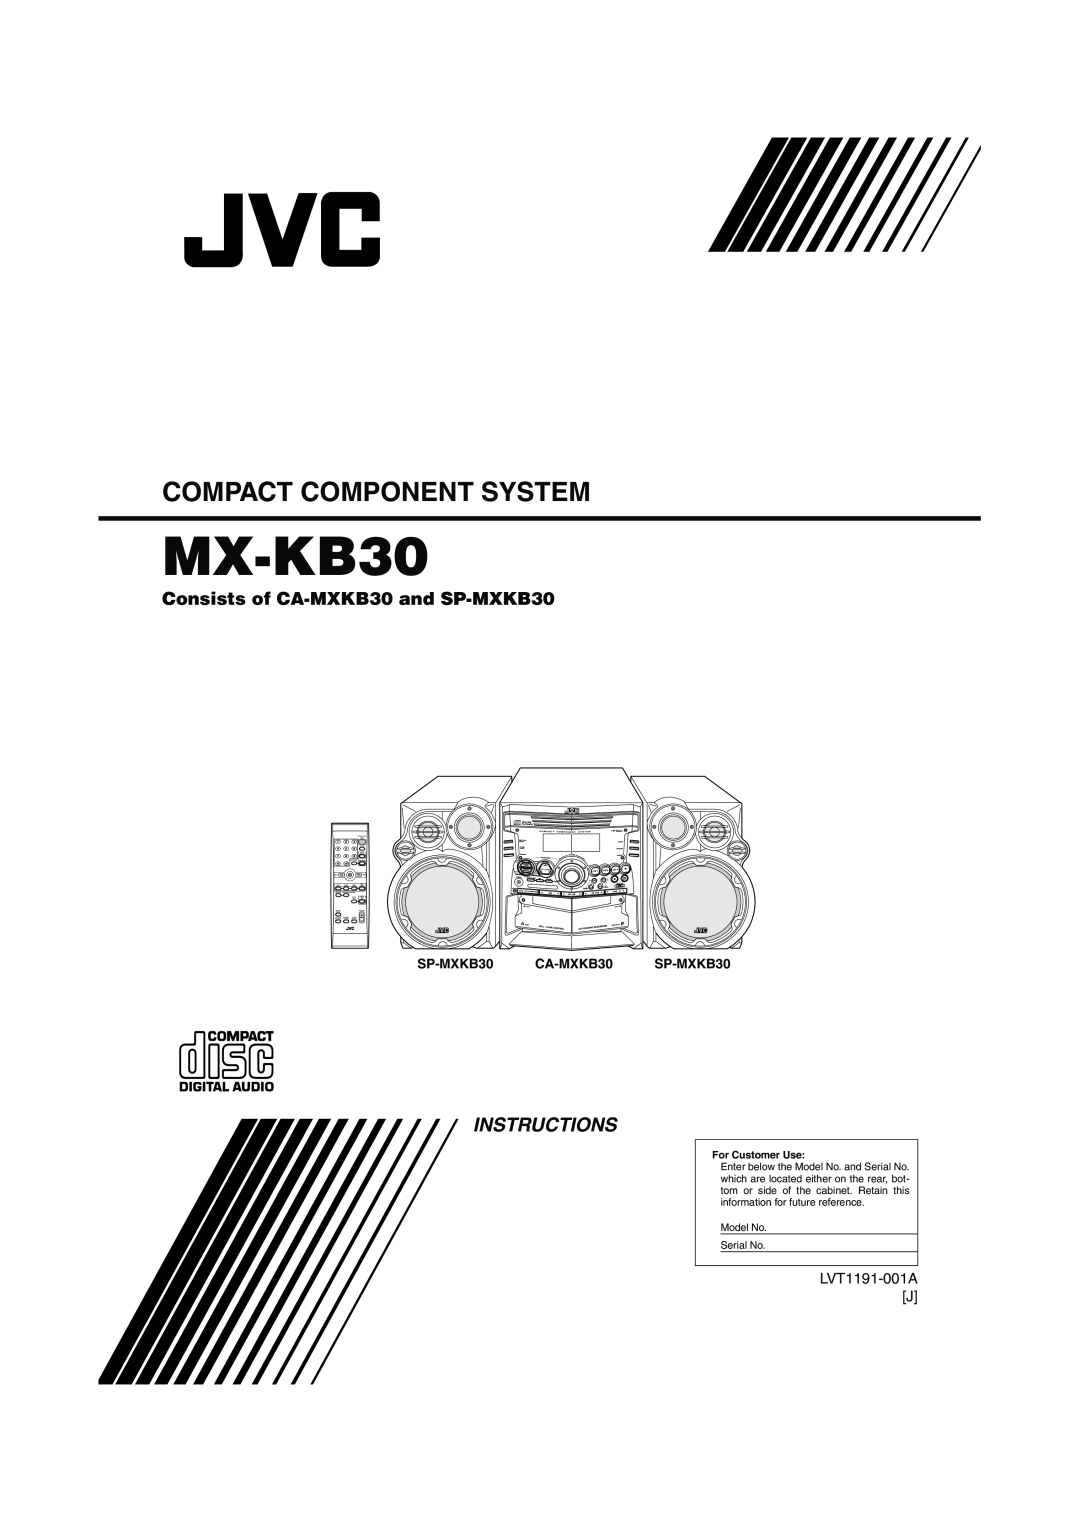 JVC MX-KB30 manual Compact Component System, Instructions, Consists of CA-MXKB30and SP-MXKB30, For Customer Use 